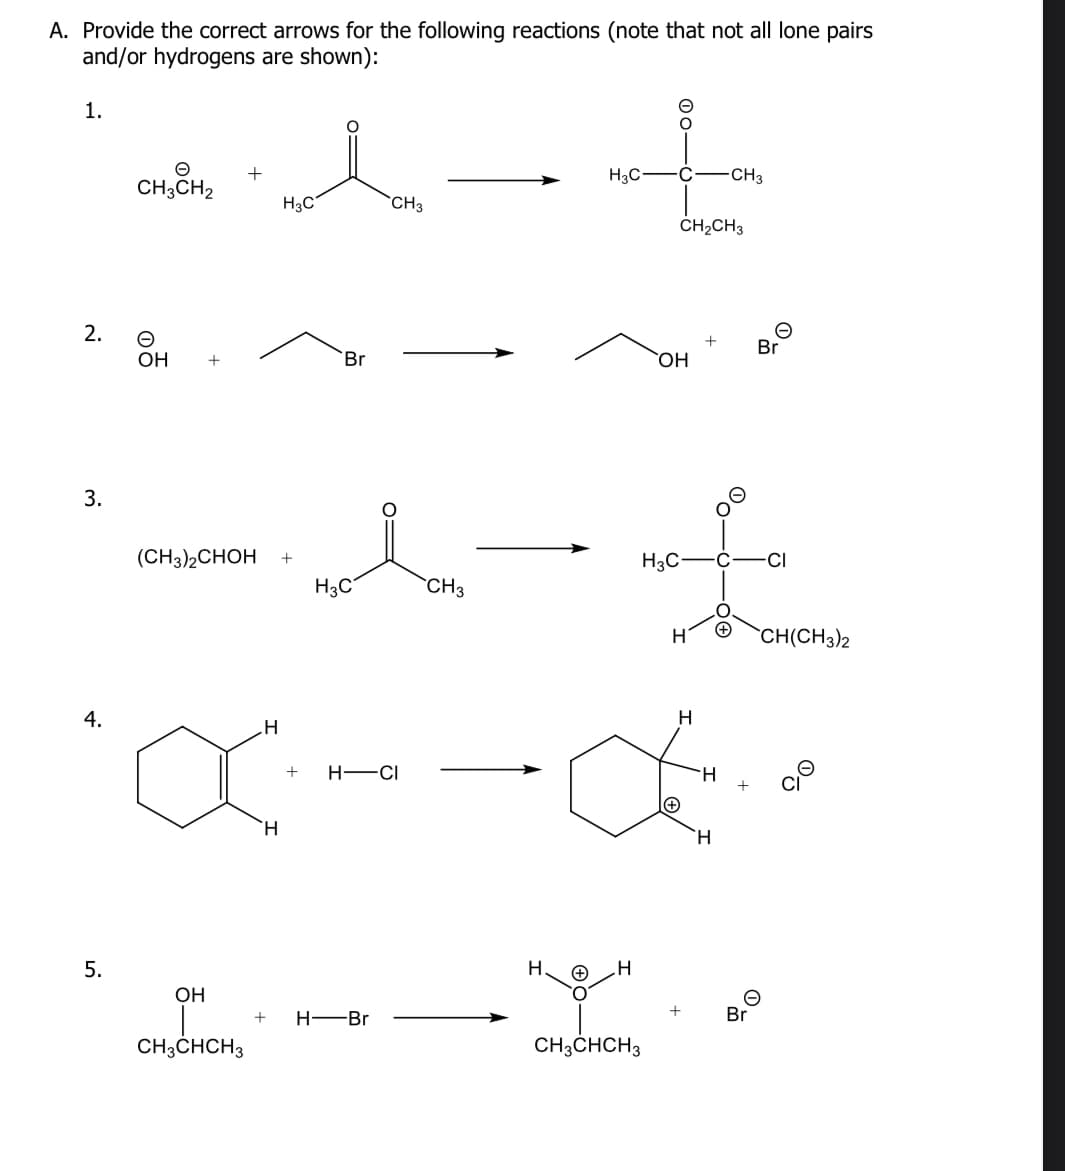 A. Provide the correct arrows for the following reactions (note that not all lone pairs
and/or hydrogens are shown):
1.
2.
3.
4.
5.
CH3CH₂
O
OH
^-+
(CH3)2CHOH +
H
X
H
OH
CH3CHCH3
H3C
Br
H3C
CH3
+ H-CI
+ H-Br
CH3
H3C C CH3
H_H
CH₂CH3
OH
H3C-
CH3CHCH3
H
Œ..
H
H
Br
Br
CH(CH3)2